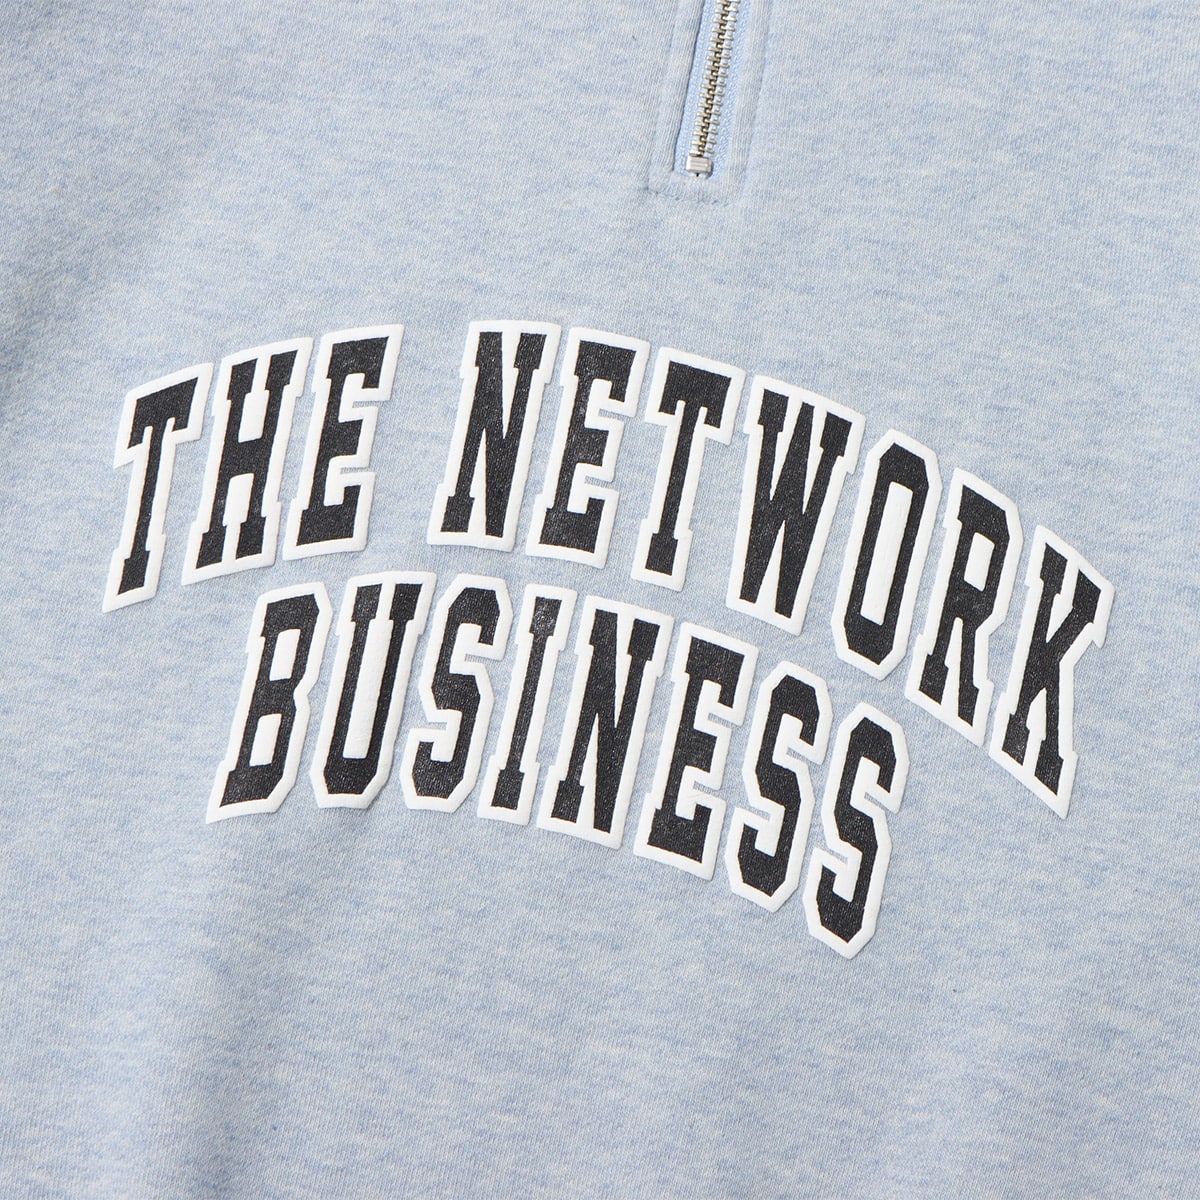 THE NETWORK BUSINESS ARCH LOGO HALF ZIP SWEAT MIX BLUE 21HO-I